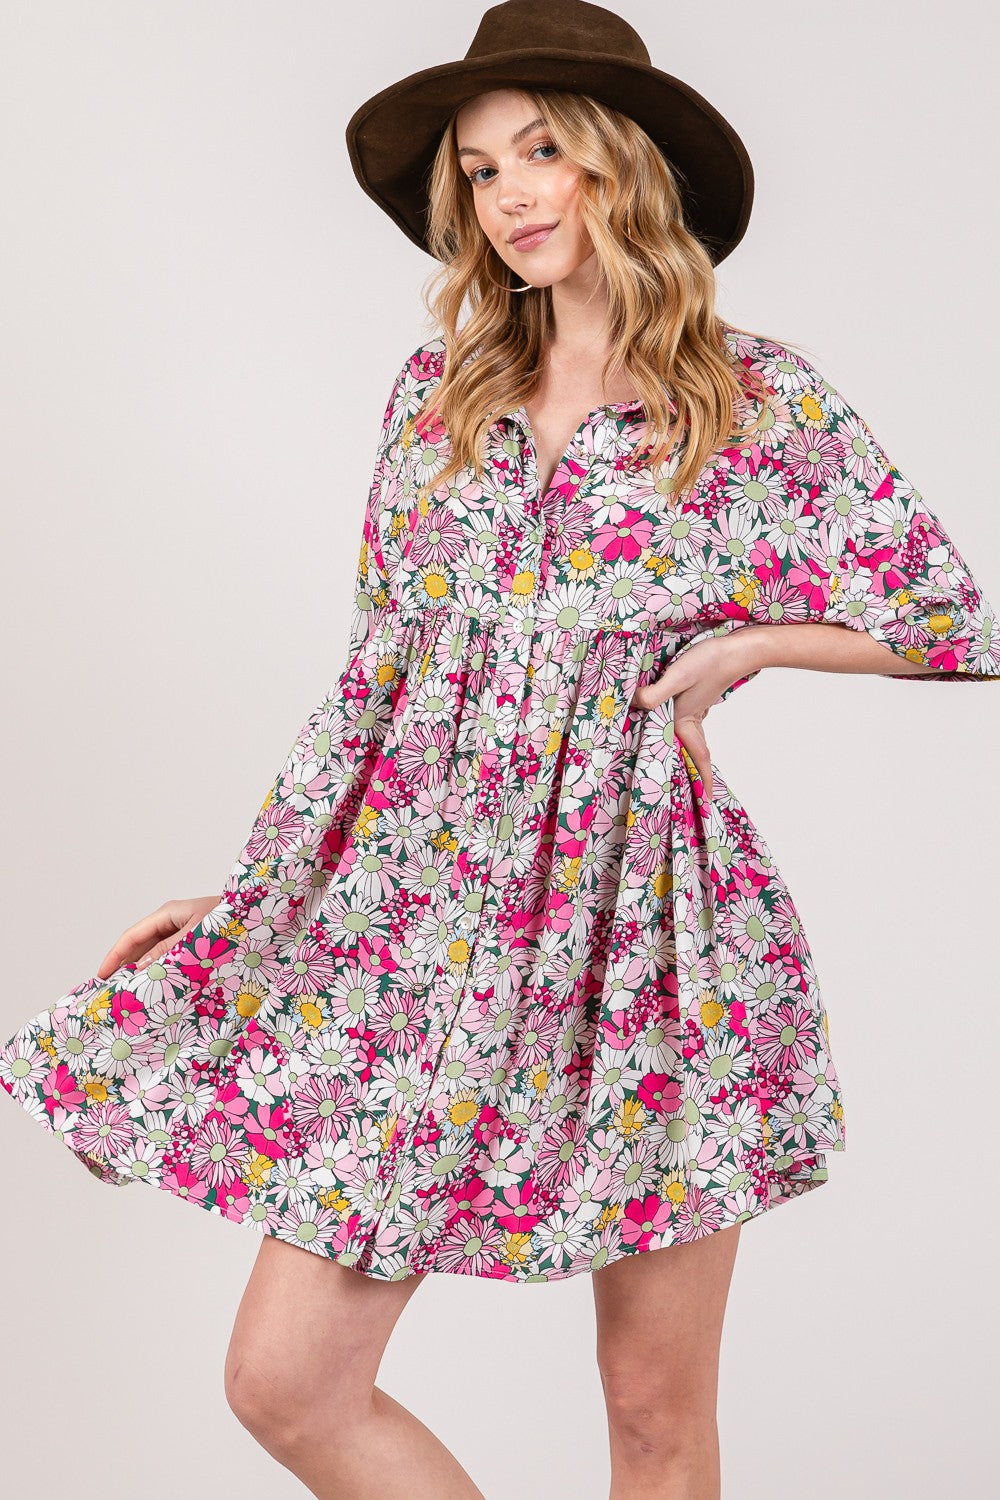 Whoopsie Daisy-SAGE + FIG Floral Button Down Mini Shirt Dress-Whoopsie Daisy